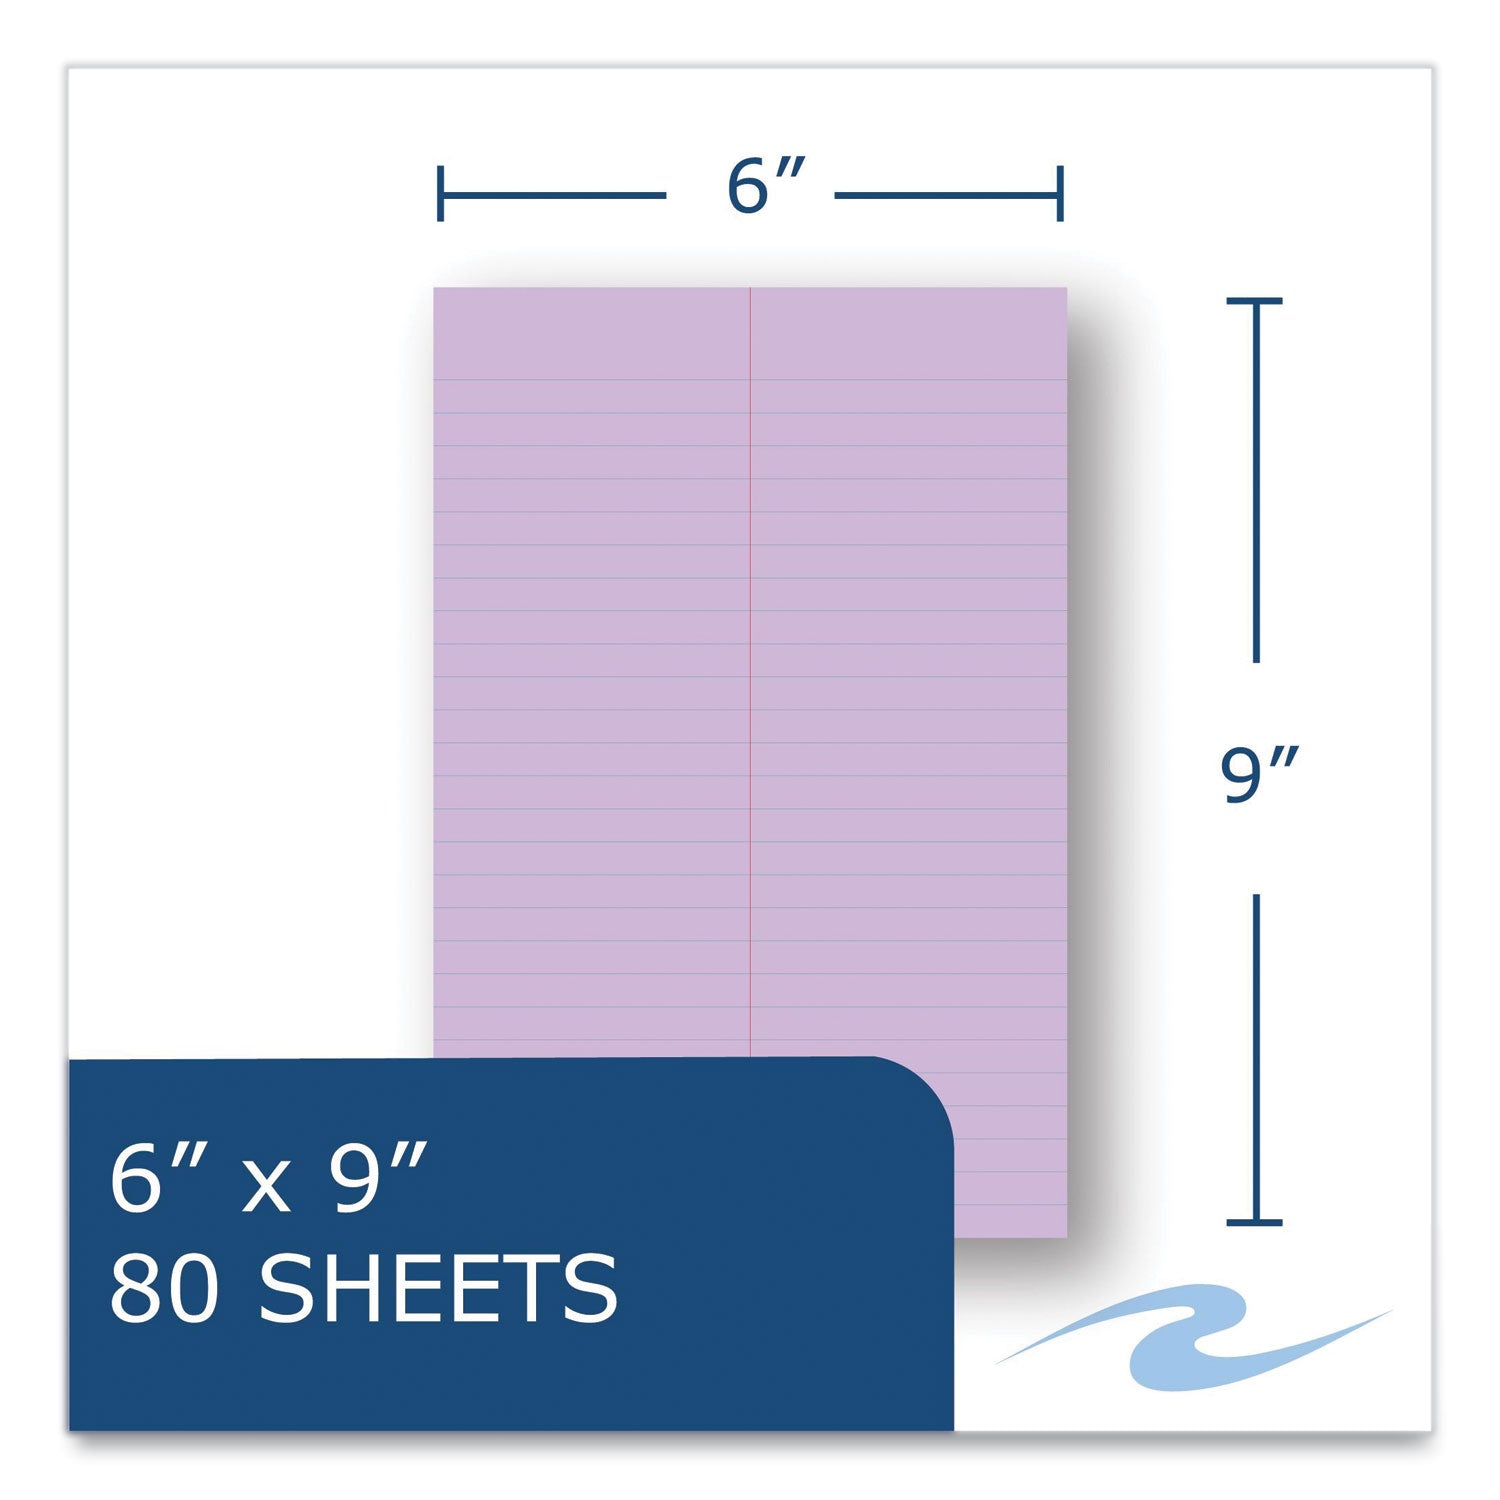 enviroshades-steno-pad-gregg-rule-white-cover-80-orchid-6-x-9-sheets-24-pads-carton-ships-in-4-6-business-days_roa12264cs - 5